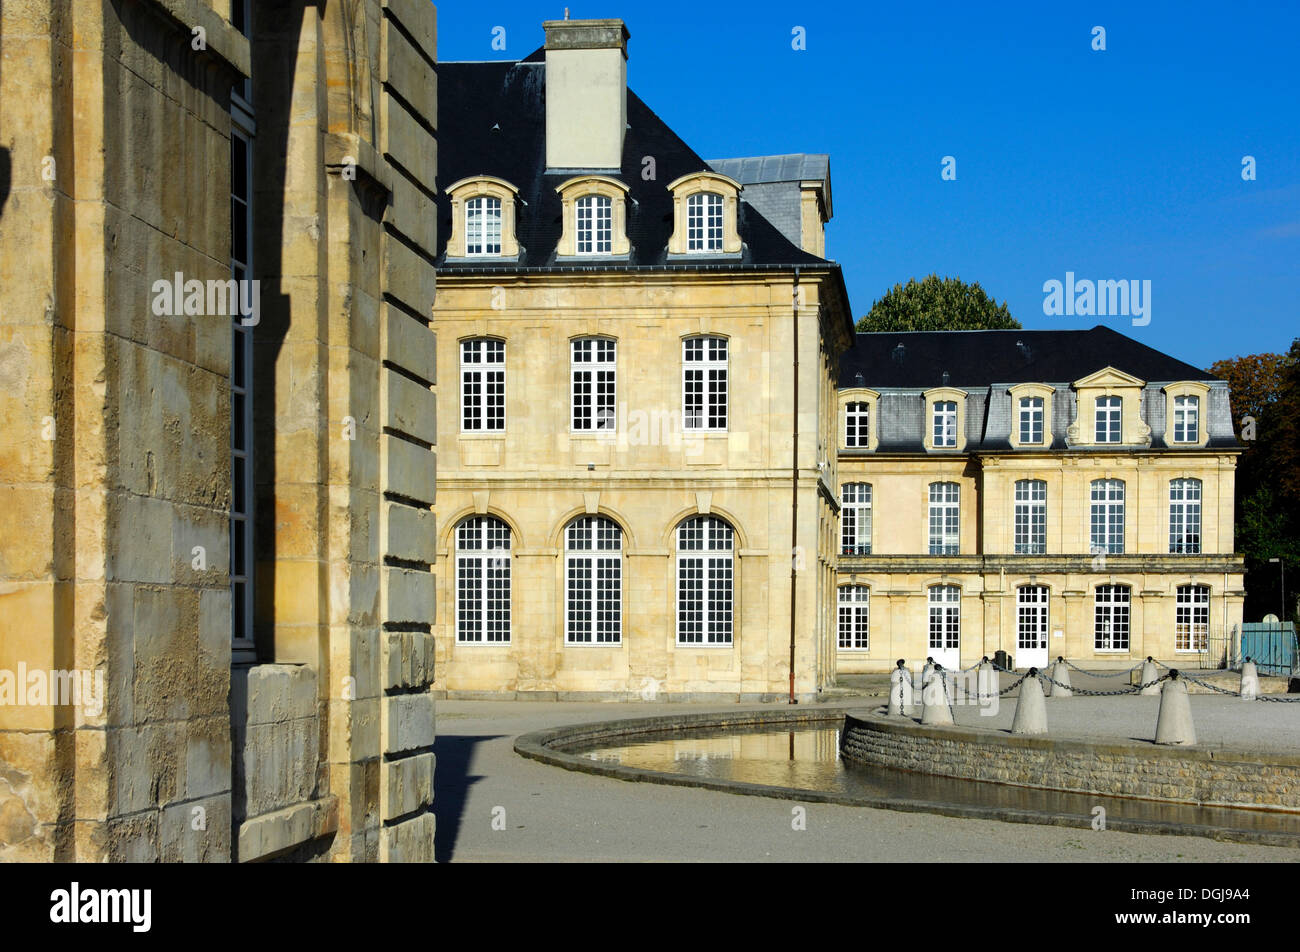 North wing of the monastery complex, Convent of Sainte-Trinité, Caen, Basse-Normandie, France, Europe Stock Photo